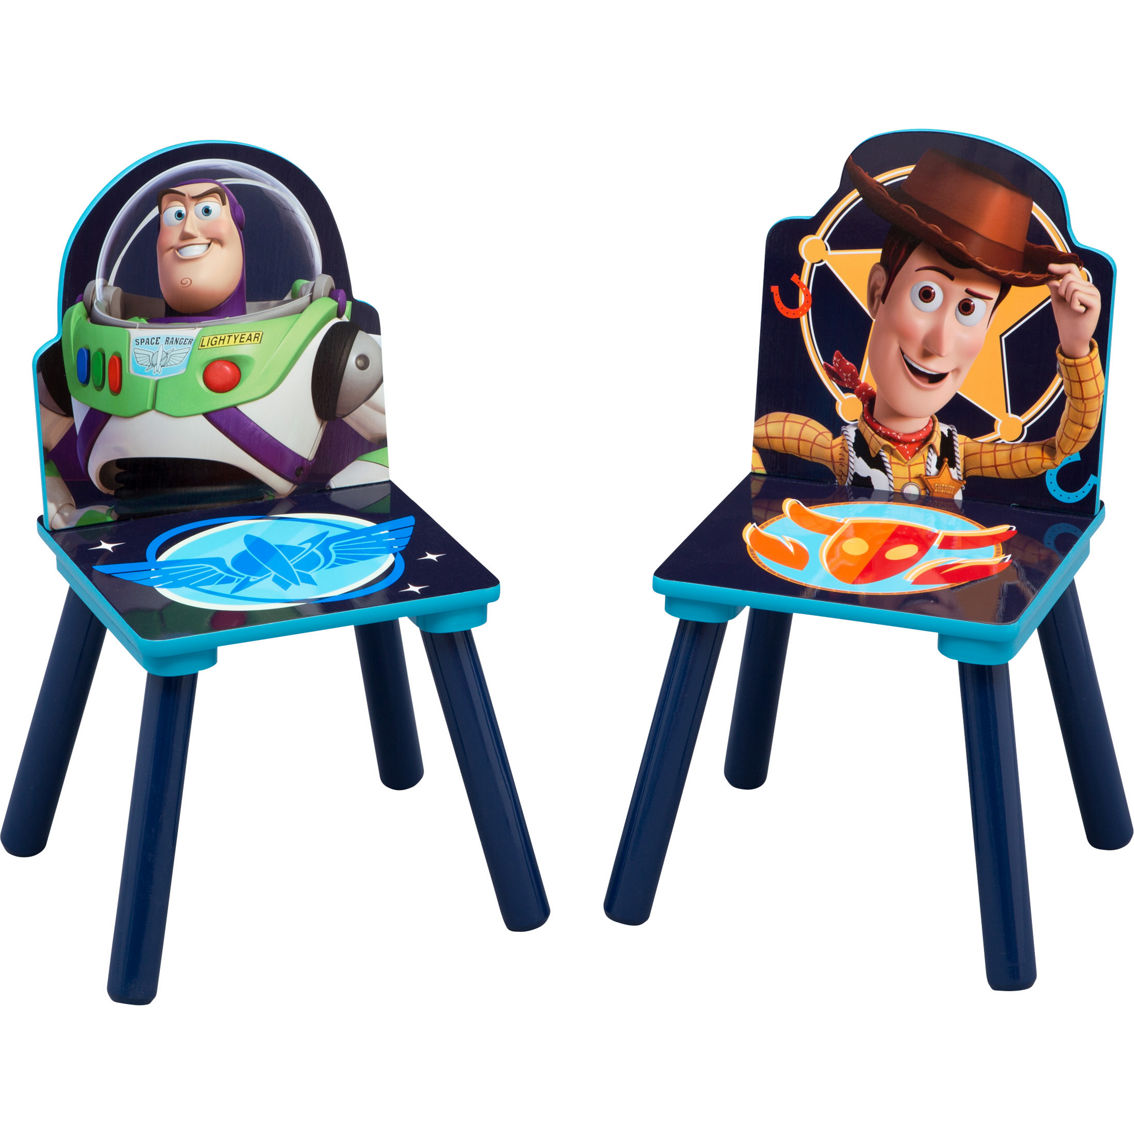 Delta Children Toy Story 4 Table and Chair Set with Storage - Image 2 of 5